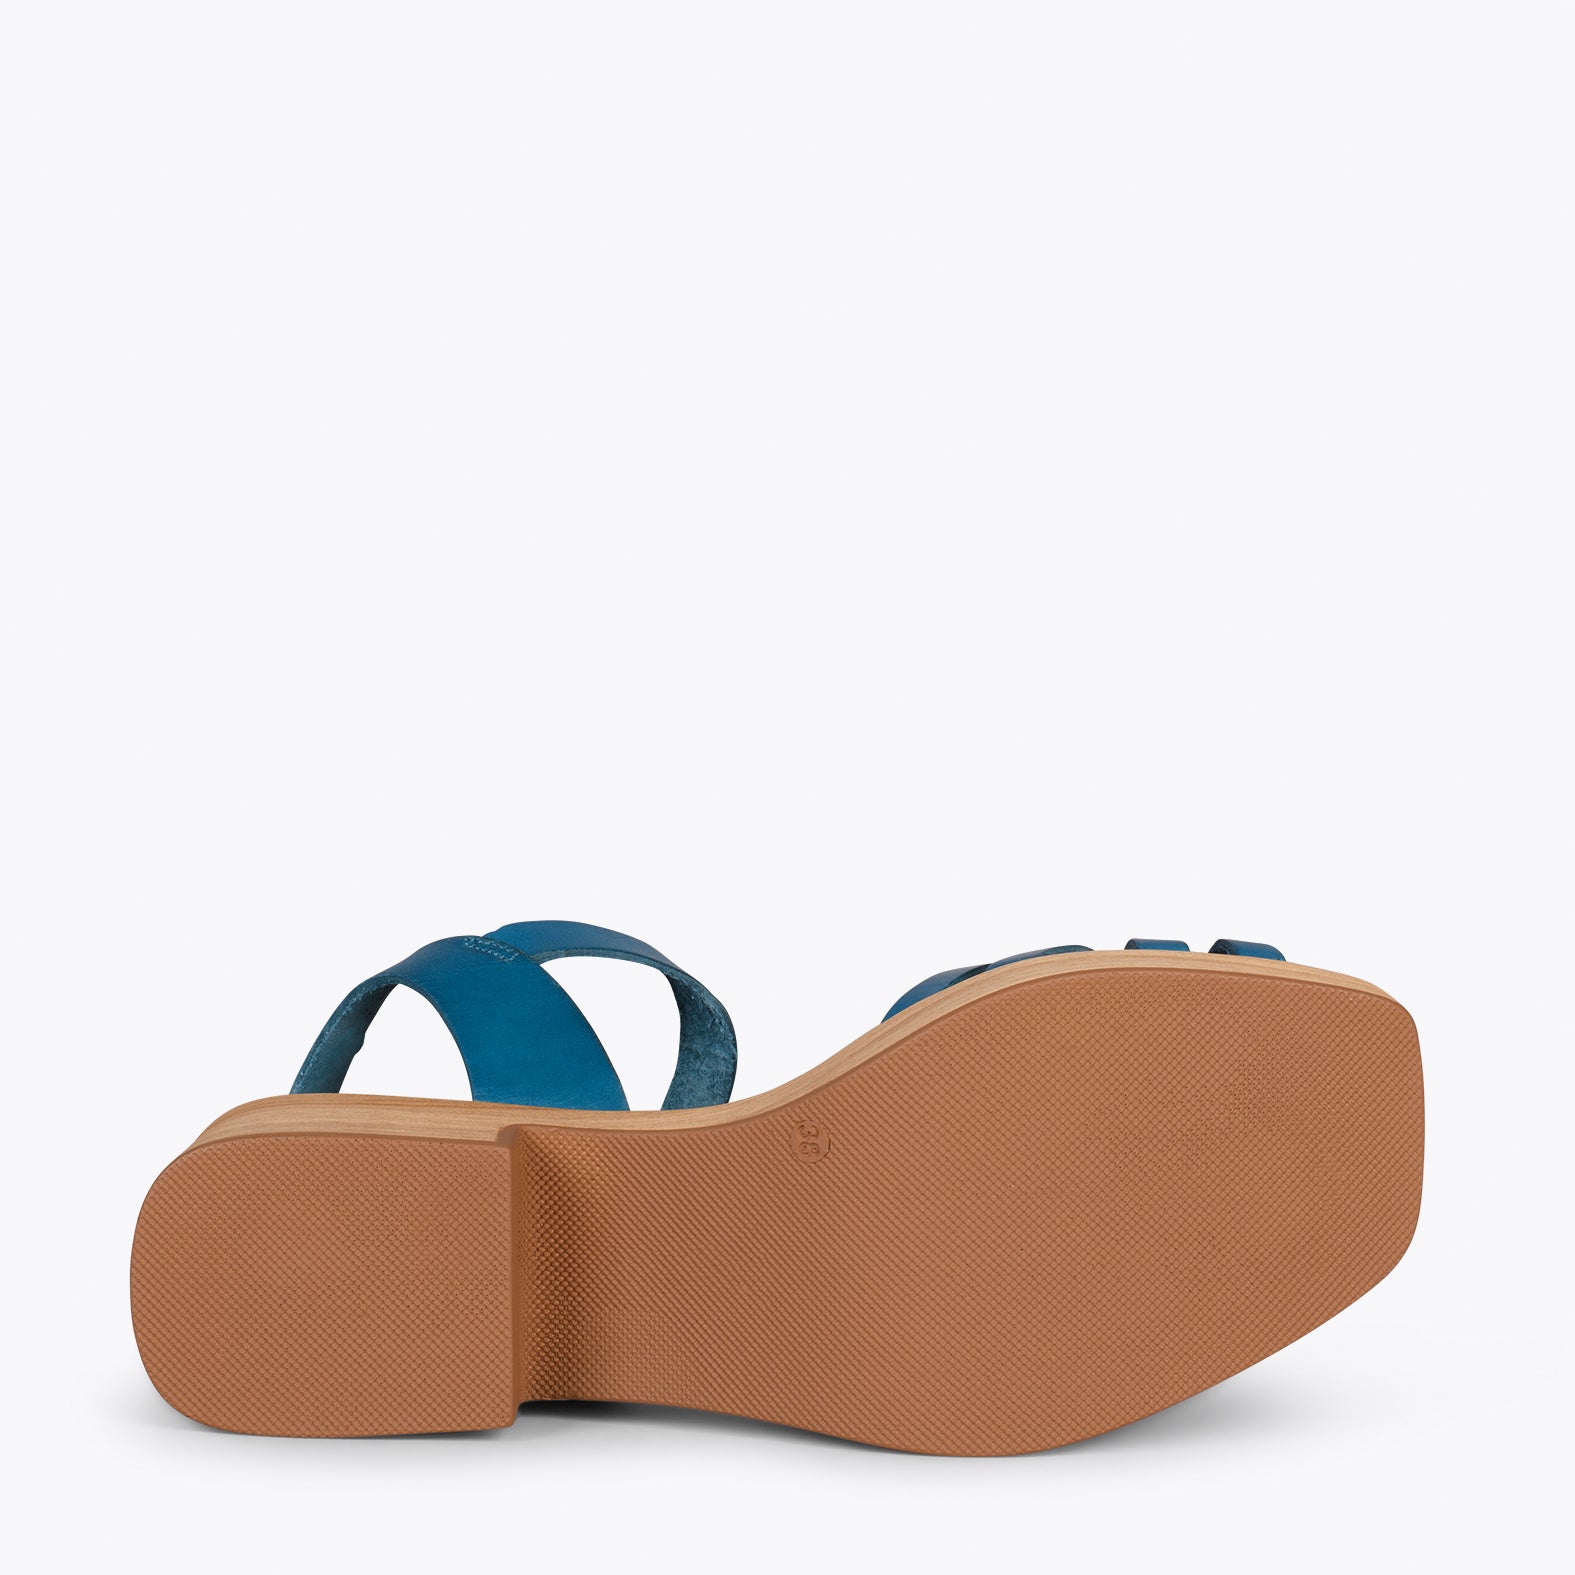 WOOD – BLUE strappy sandal with wooden heel